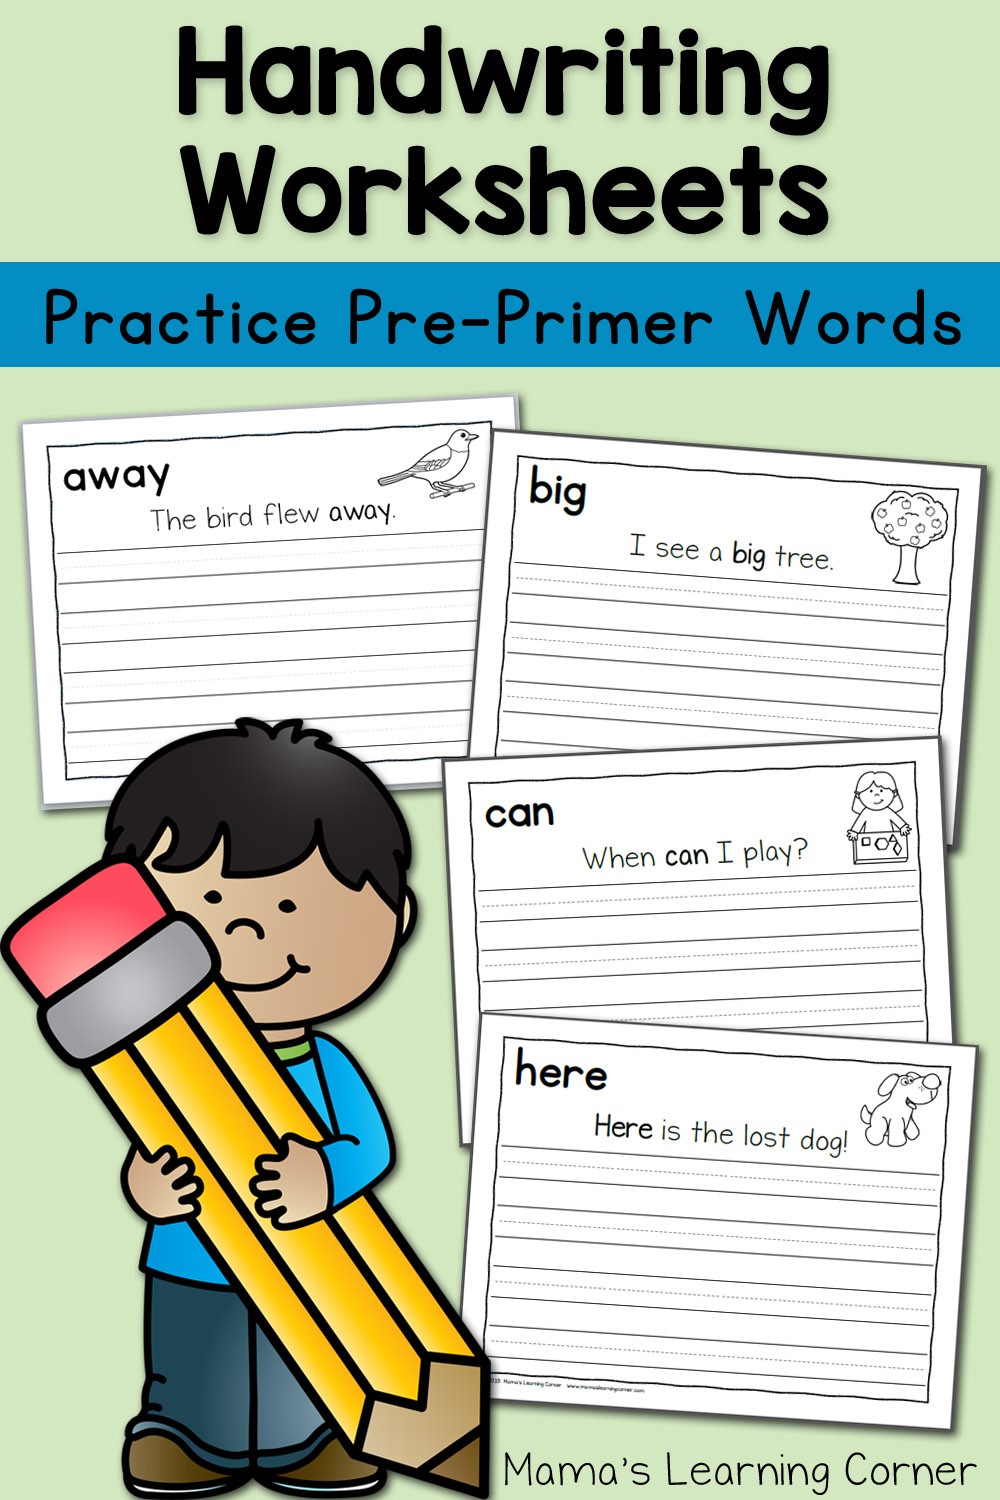 Handwriting Worksheets for Kids: Pre-Primer Dolch Words! - Mamas